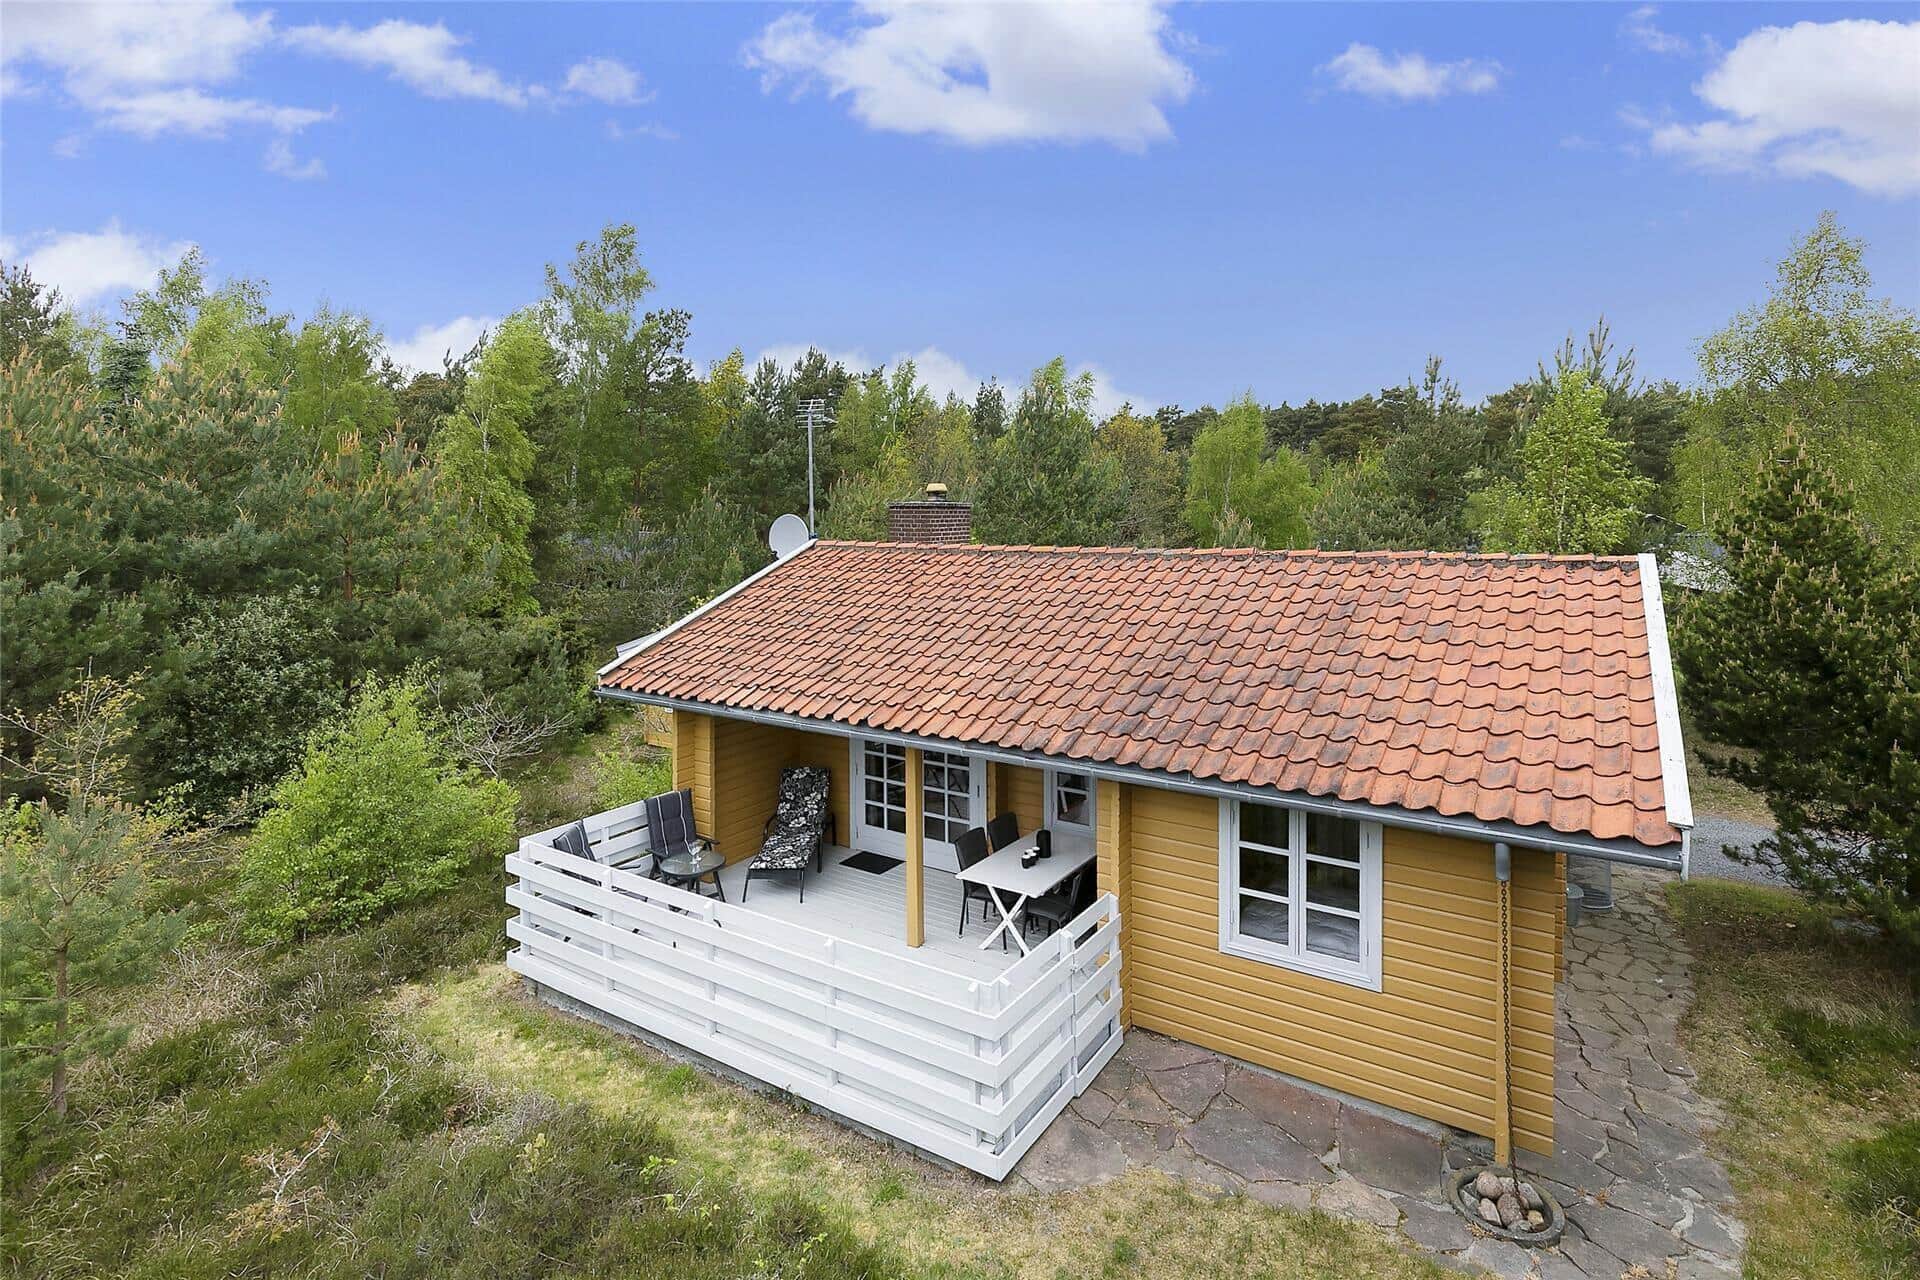 Image 0-10 Holiday-home 1576, Lyngvejen 33, DK - 3720 Aakirkeby